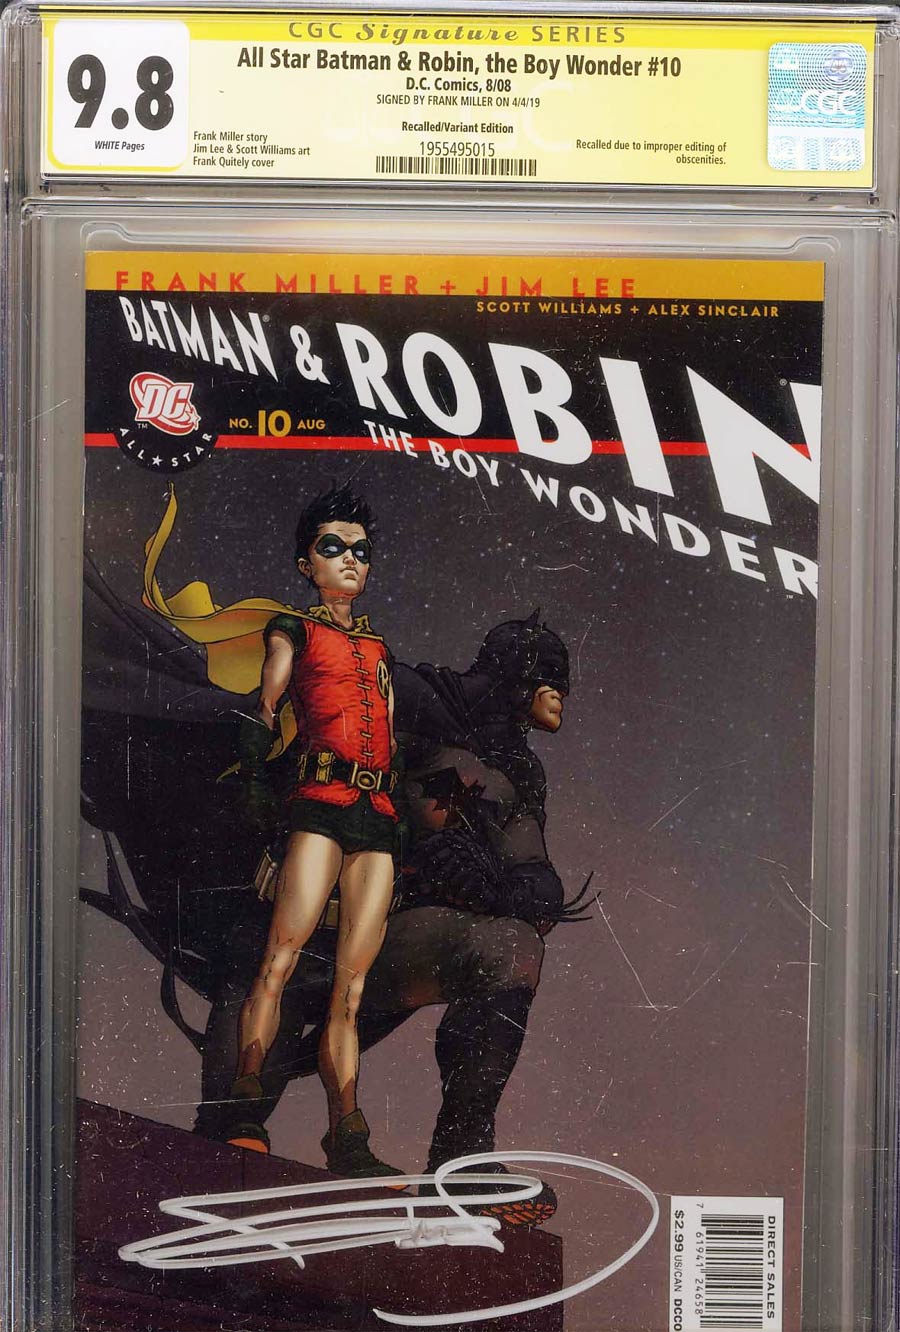 All Star Batman And Robin The Boy Wonder #10 CGC SS 9.8 Signed By Frank Miller Incentive Frank Quitely Variant Recall edition